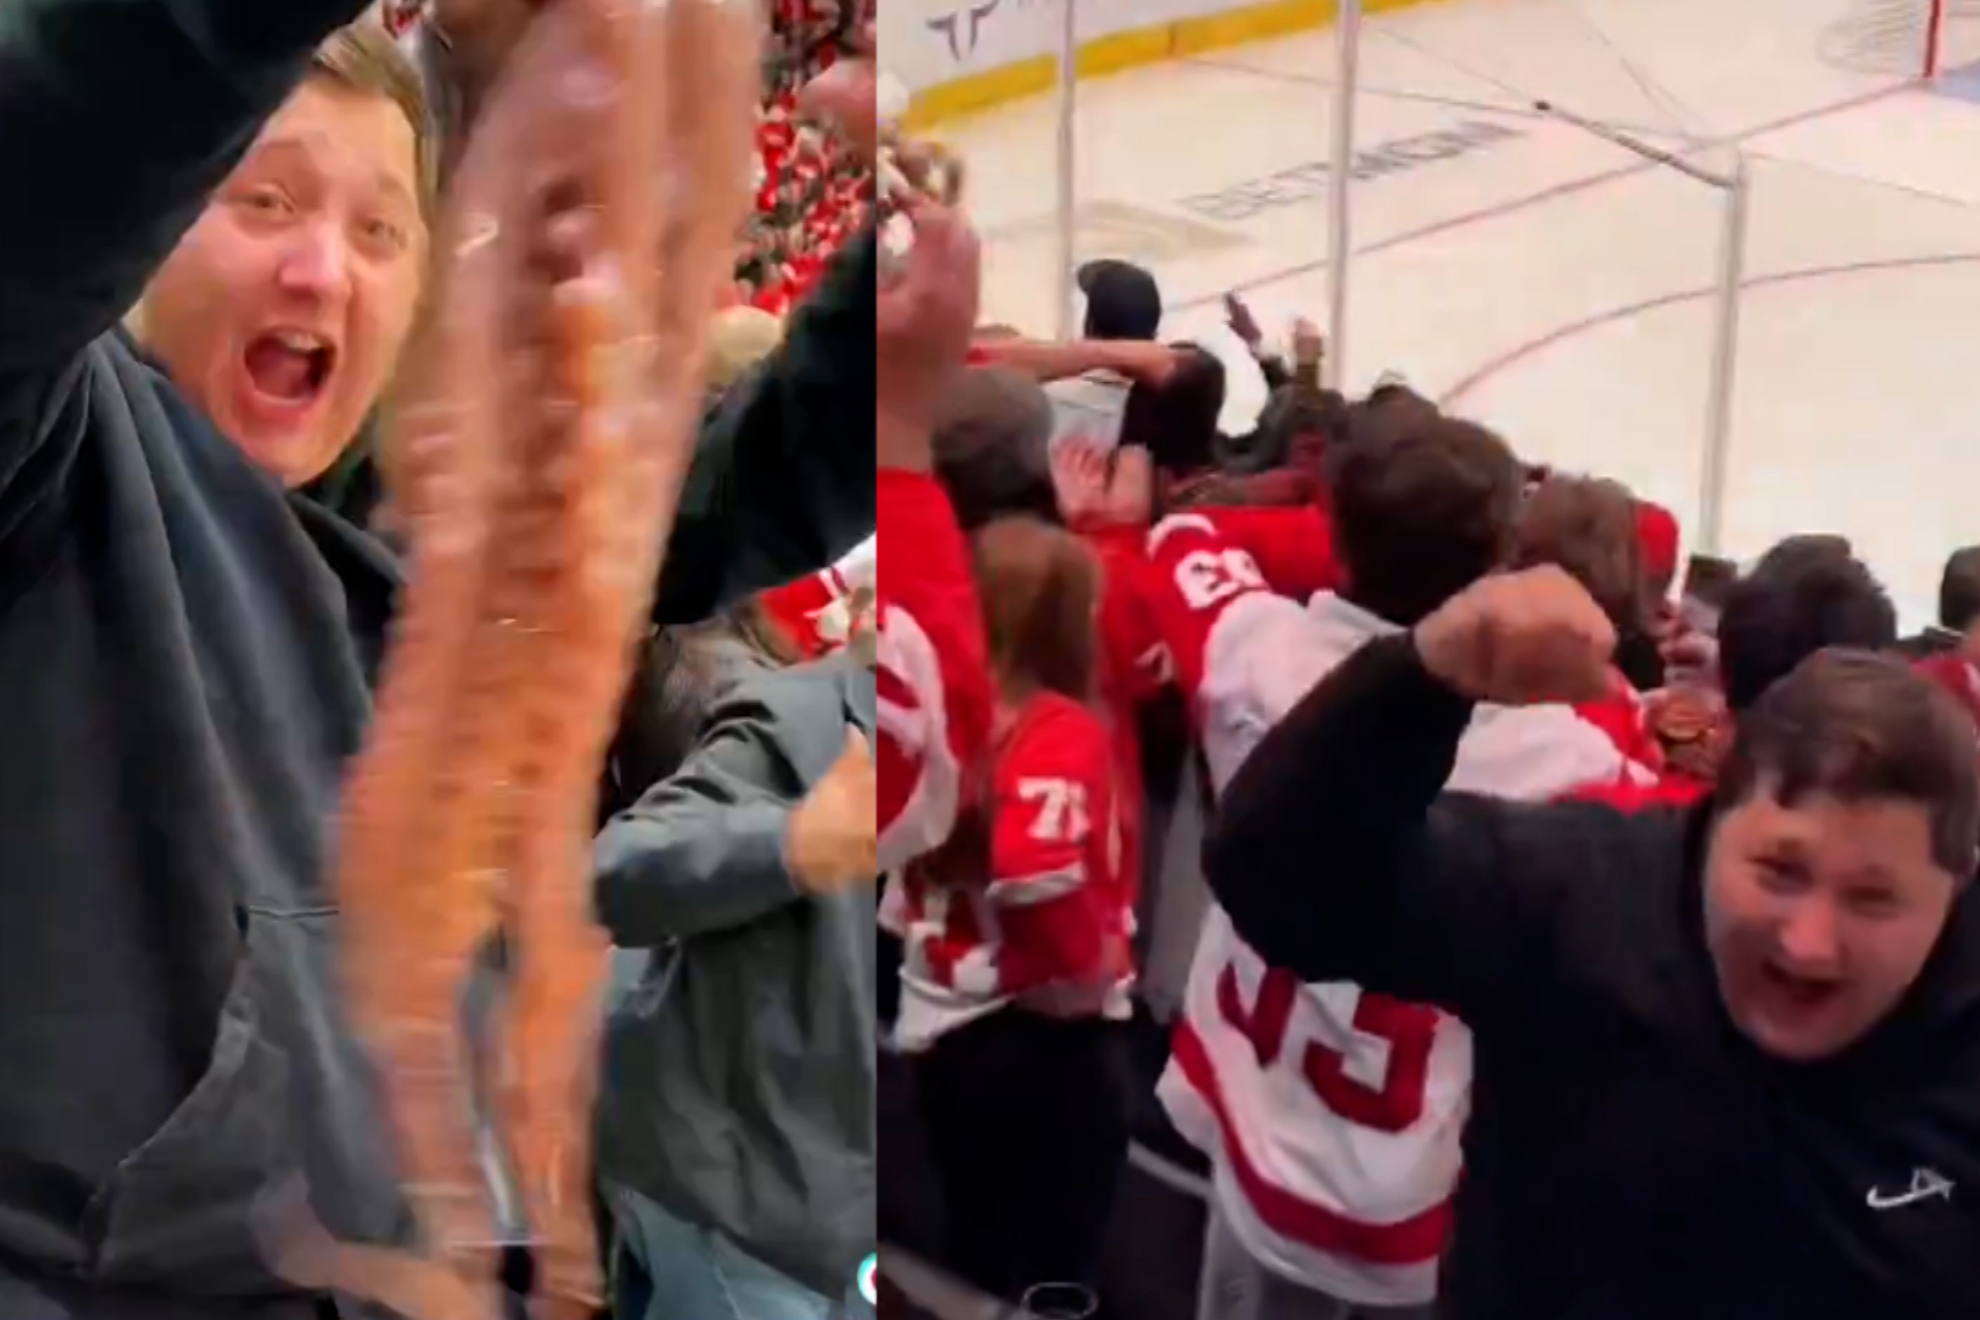 PETA offers Red Wings fans fake octopuses to throw instead of real